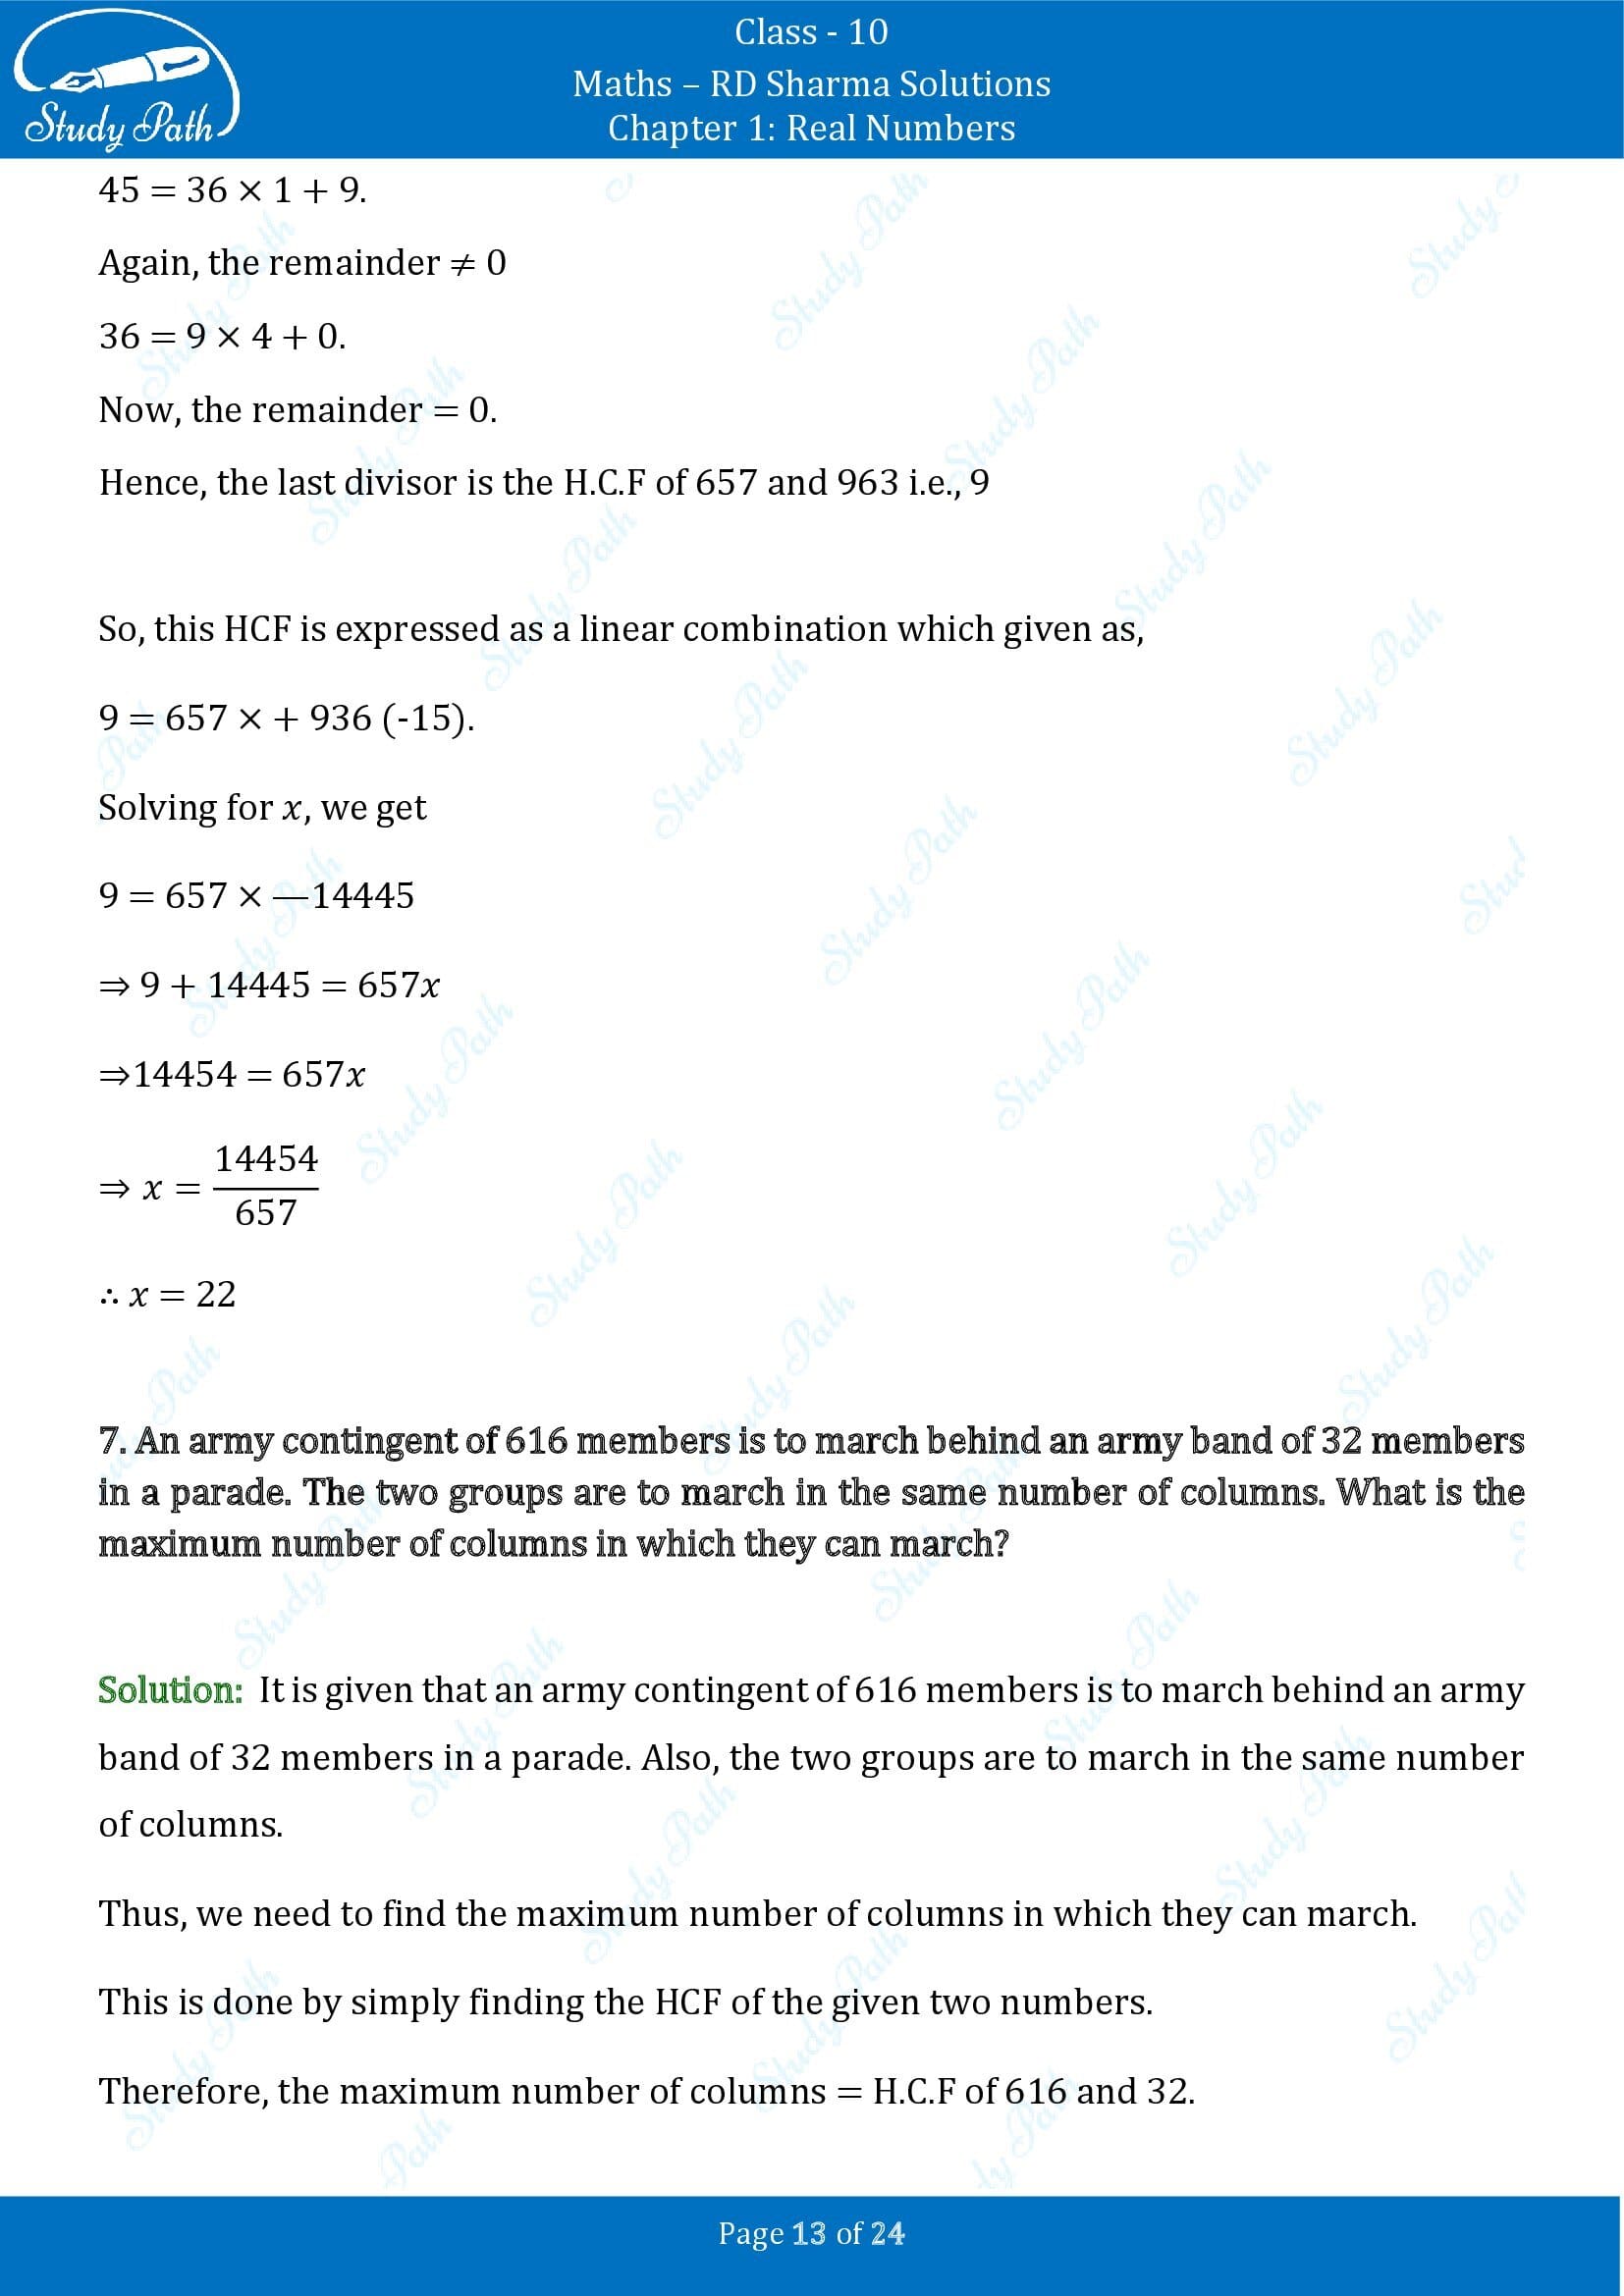 RD Sharma Solutions Class 10 Chapter 1 Real Numbers Exercise 1.2 00013